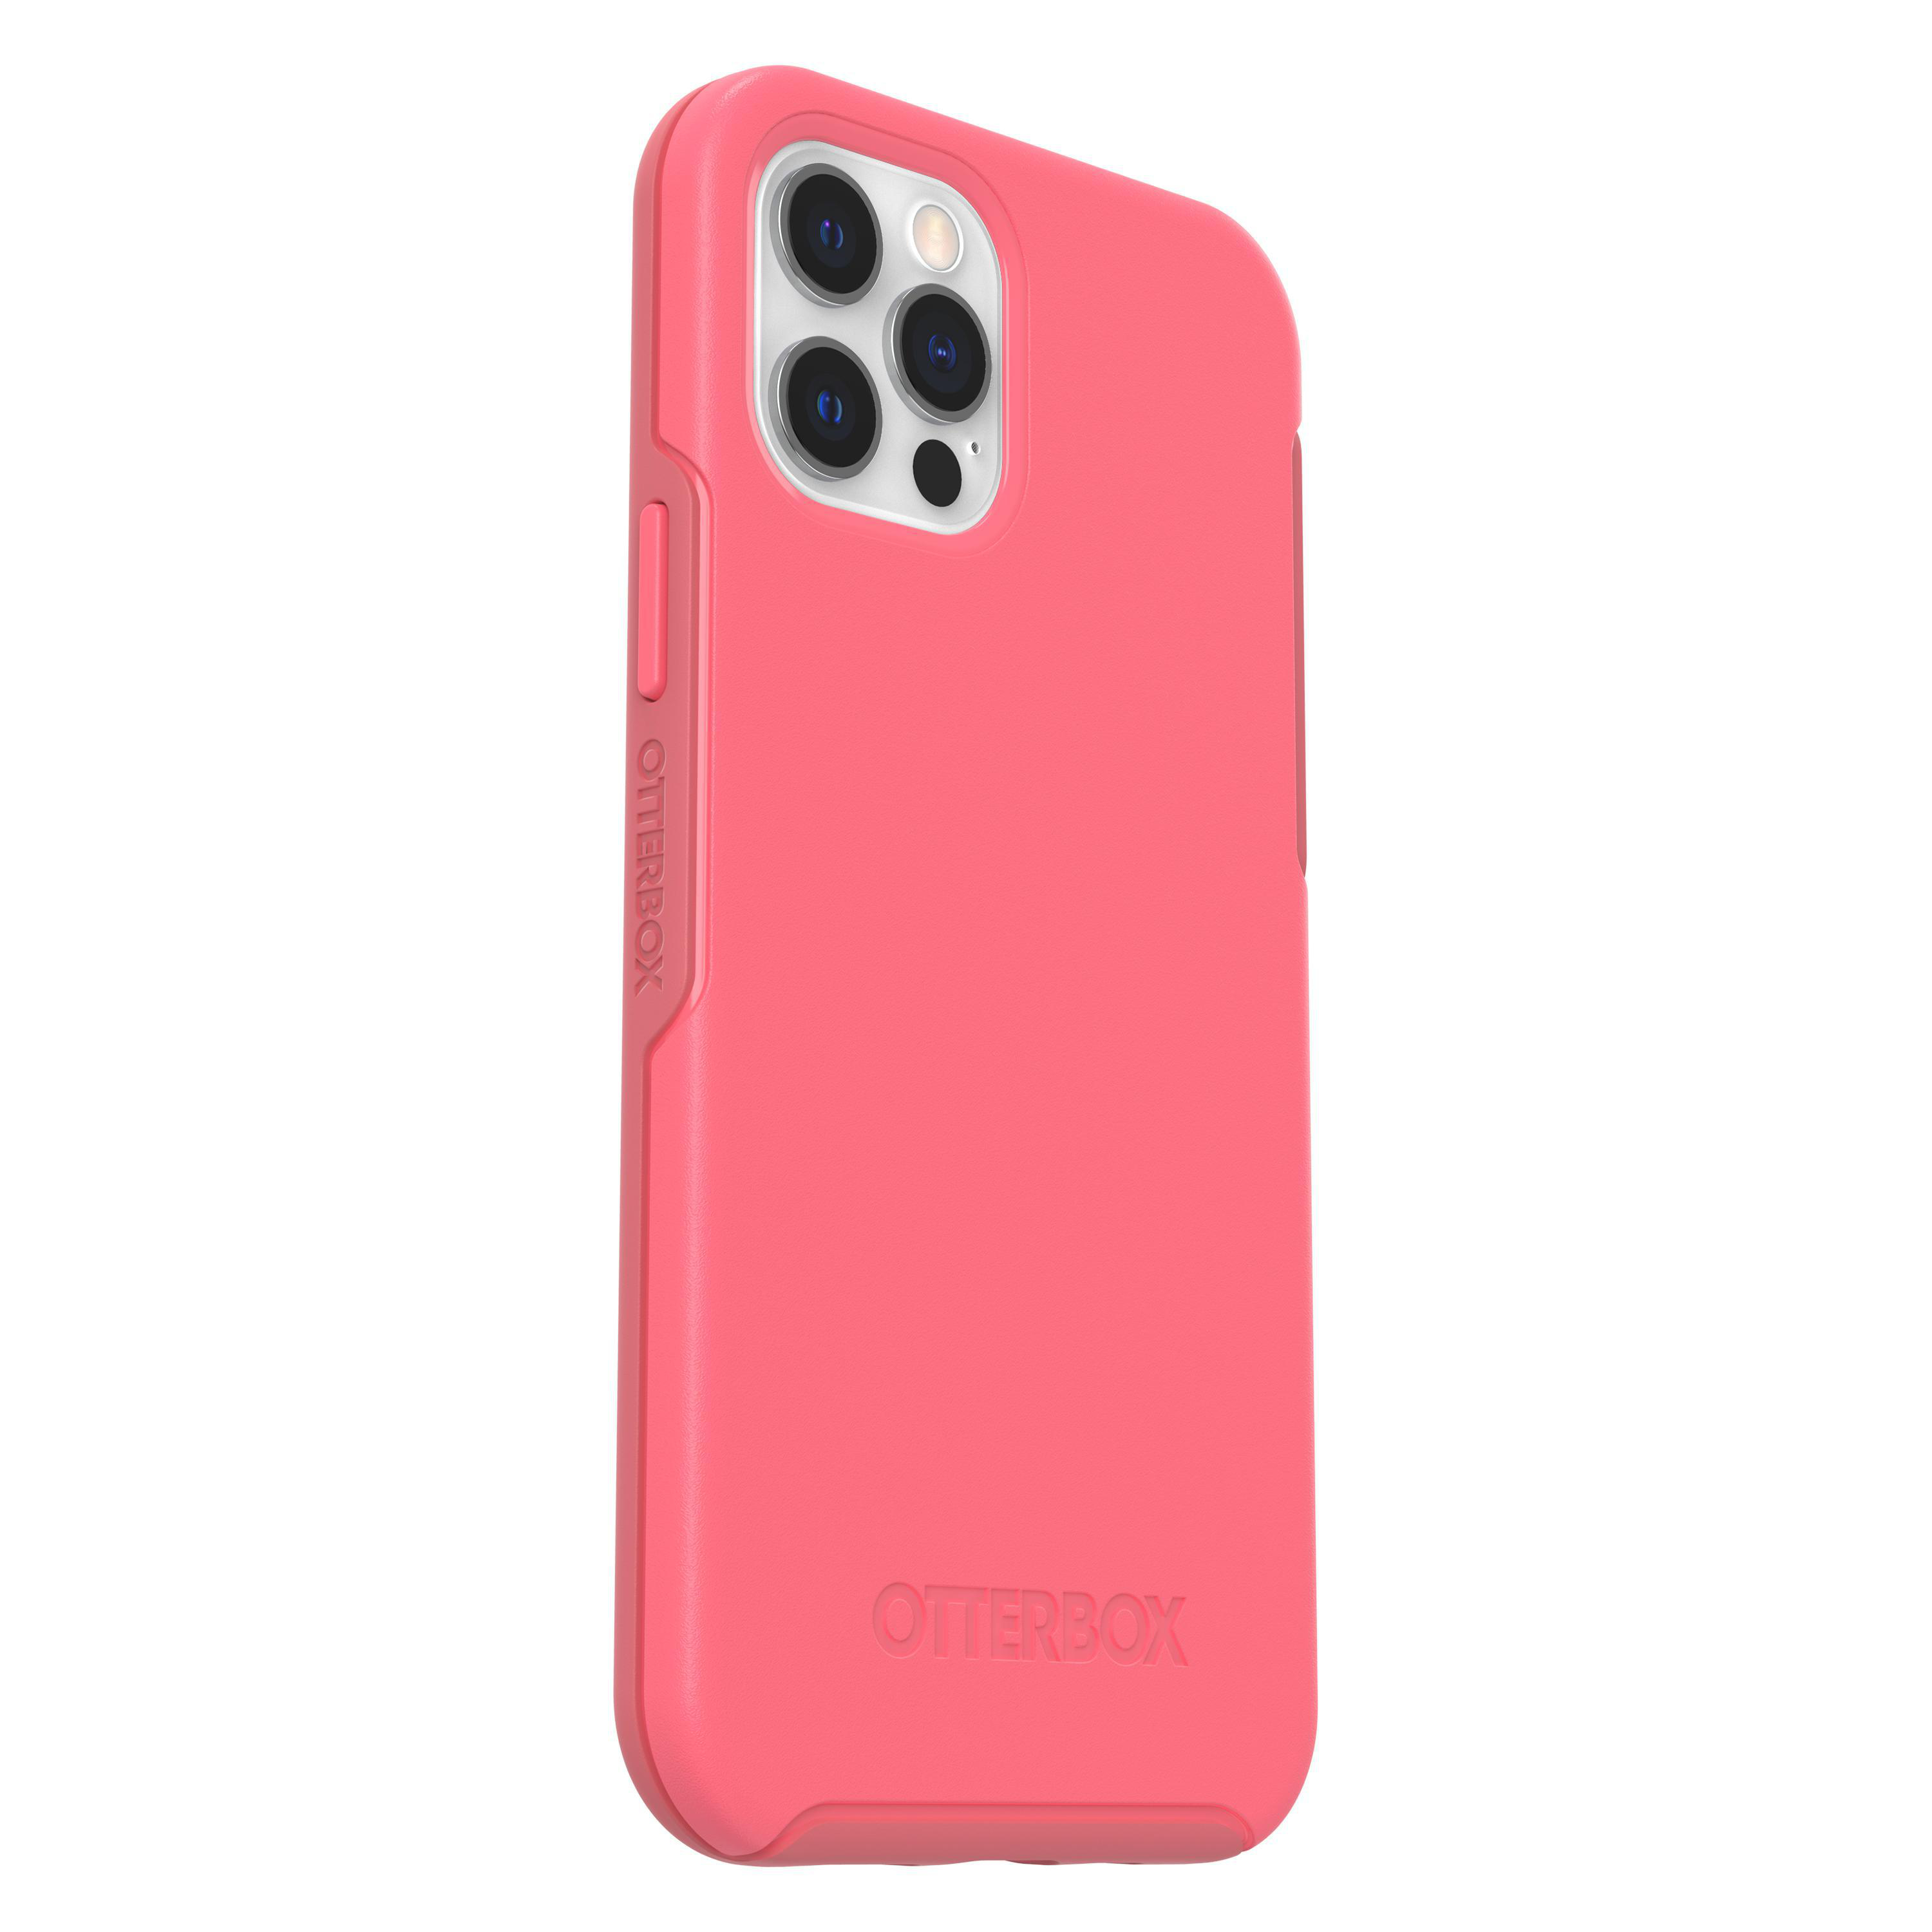 Pro, OTTERBOX Rosa 12, 12 Symmetry iPhone iPhone Backcover, Plus, Apple,